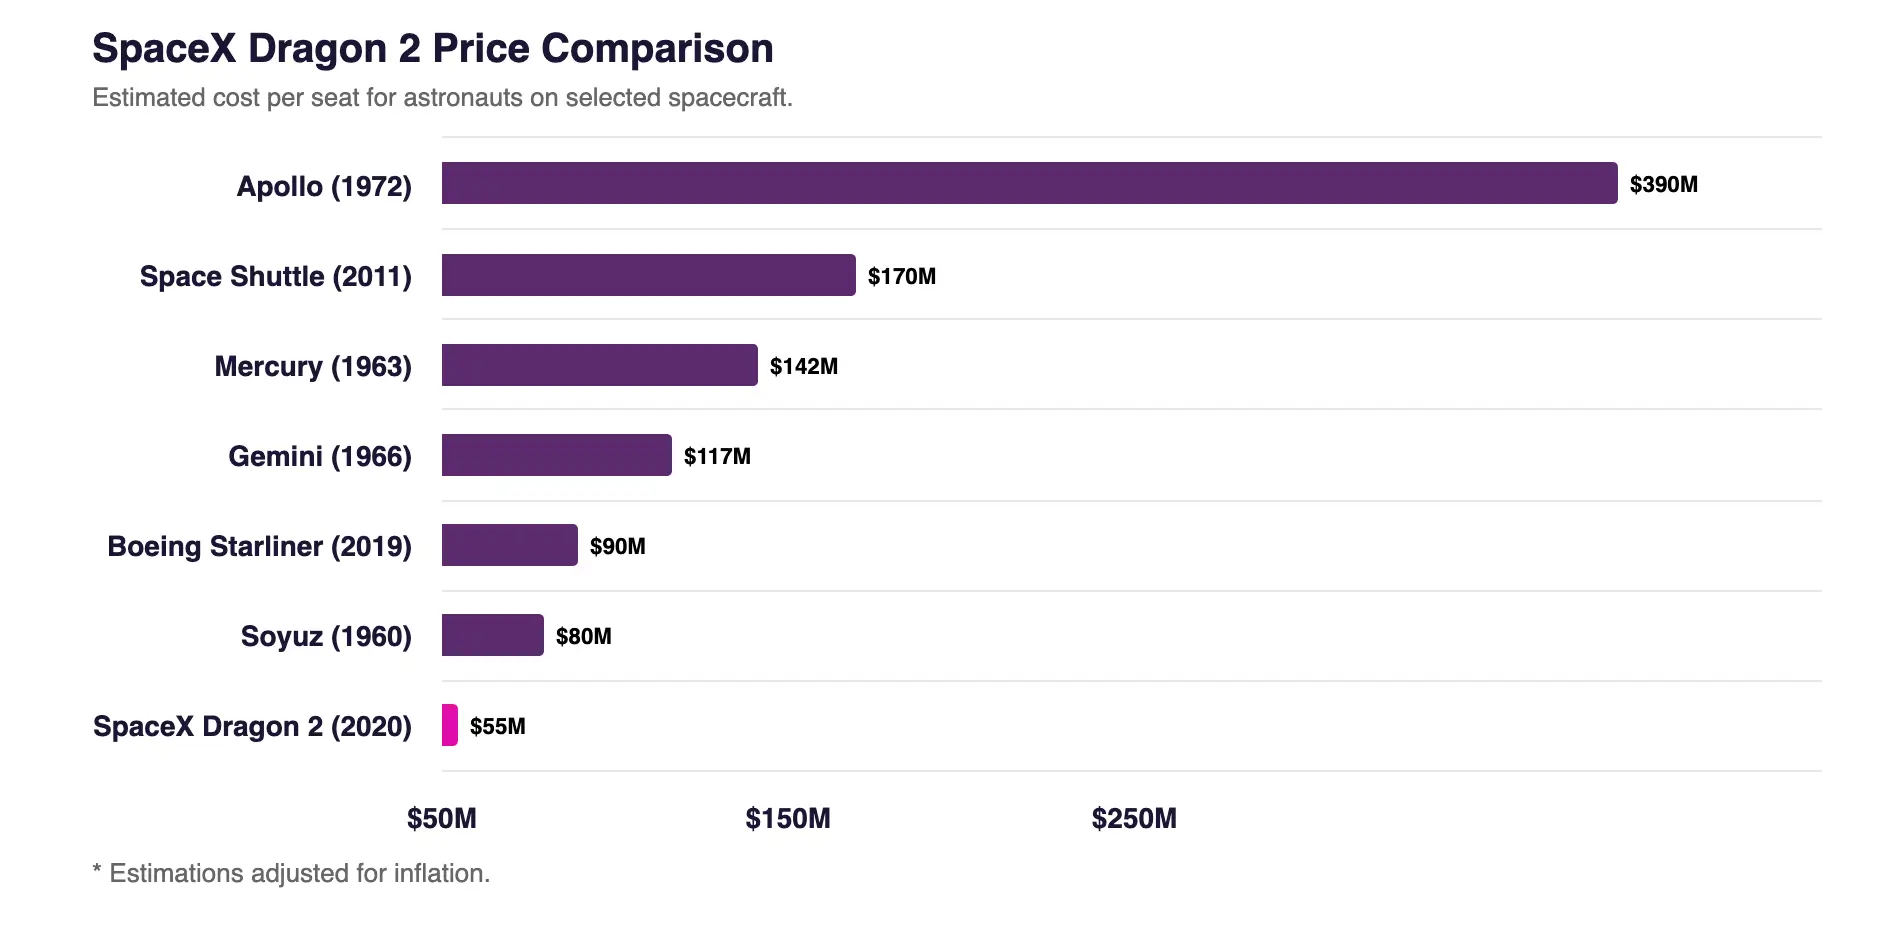 A chart comparing the estimated cost per seat for astronauts for Apollo ($390M), SpaceShuttle ($170M), Mercury ($142M), Gemini ($117M)i, Boeing Starliner ($90M), and SpaceX Dragon 2 ($55M), adjusted for inflation.